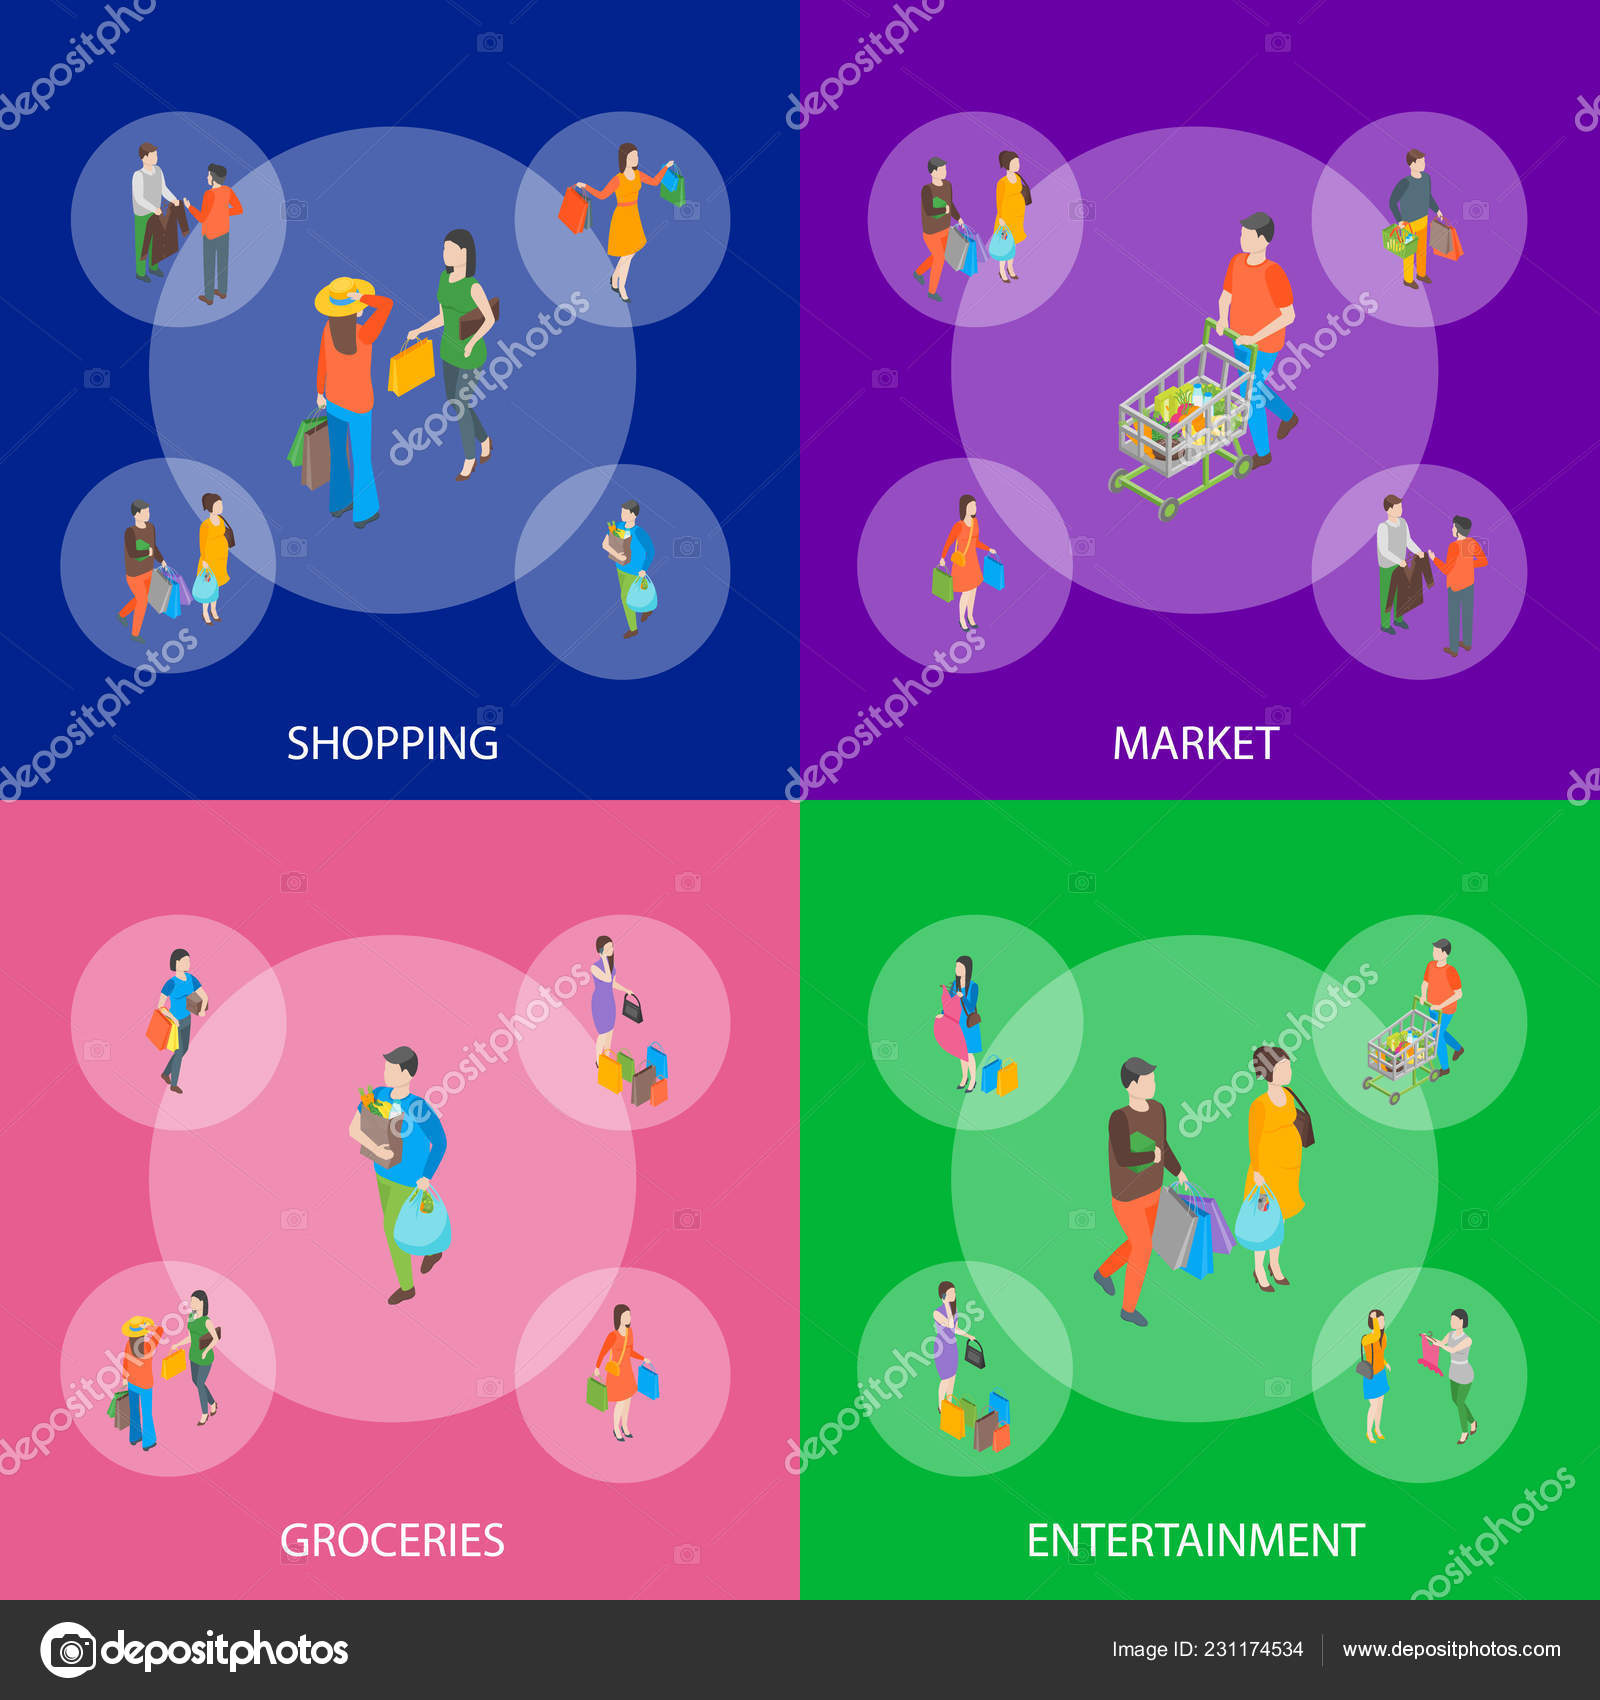 Shopping People 3d Banner Set Isometric View Vector Stock Vector C Bigmouse